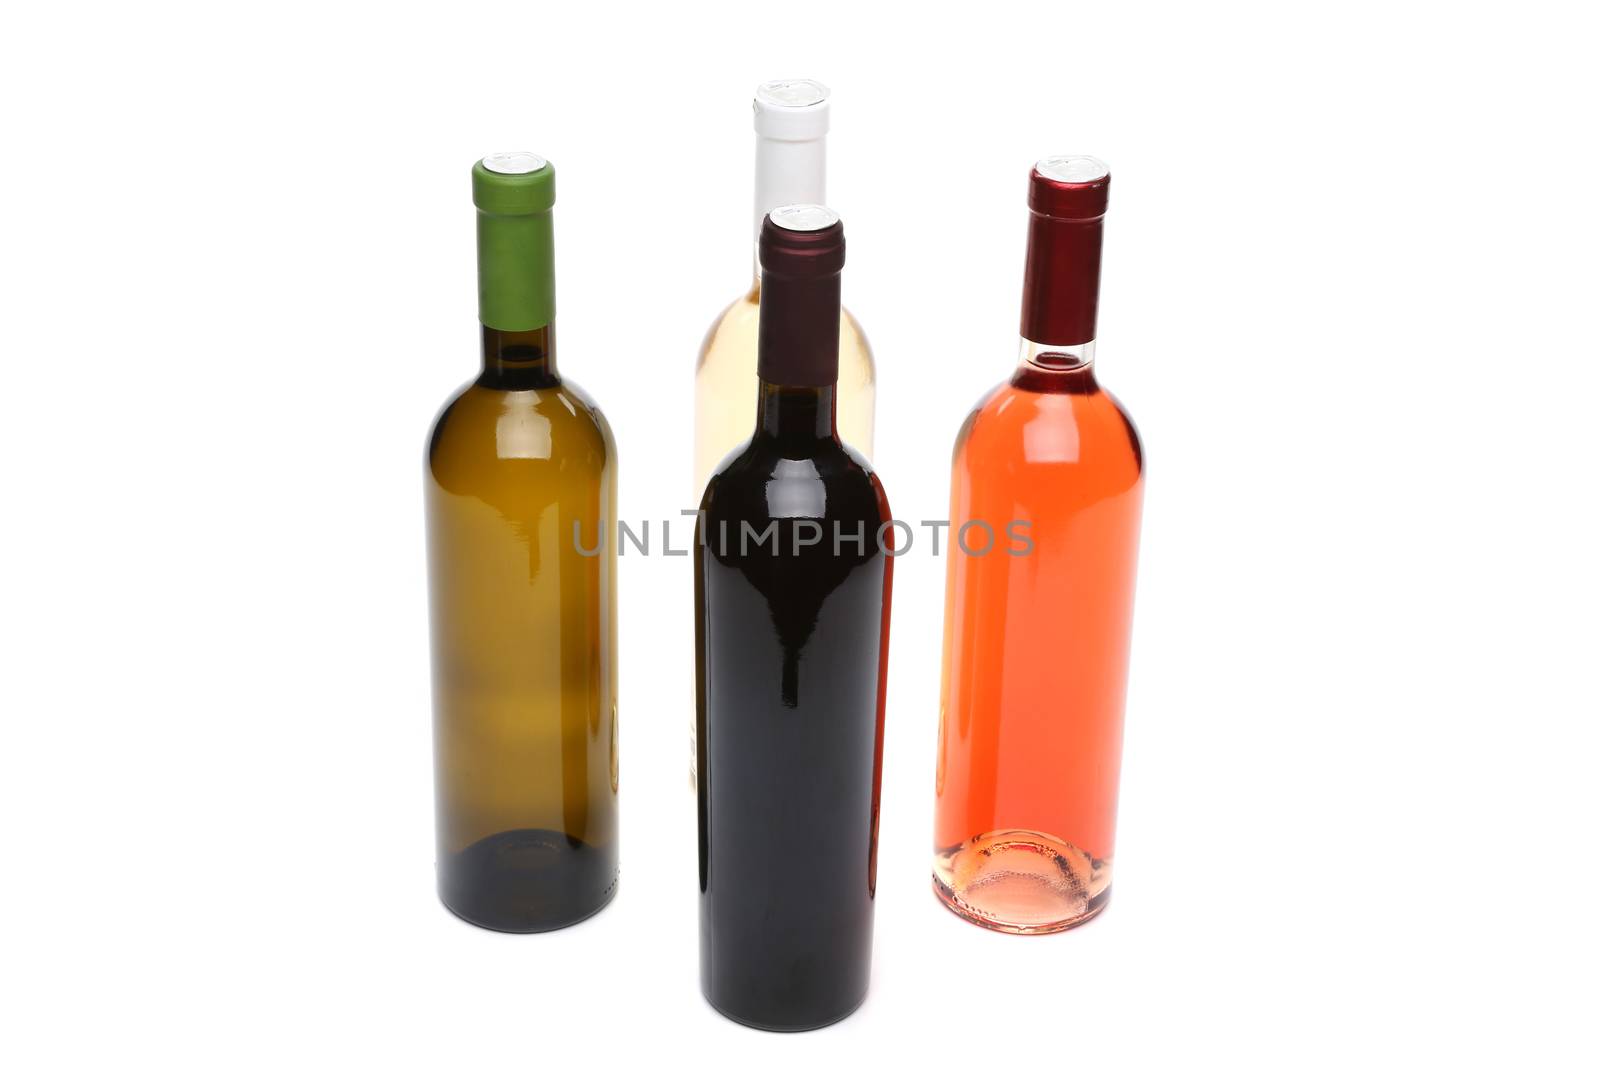 Four bottles of wine. by indigolotos